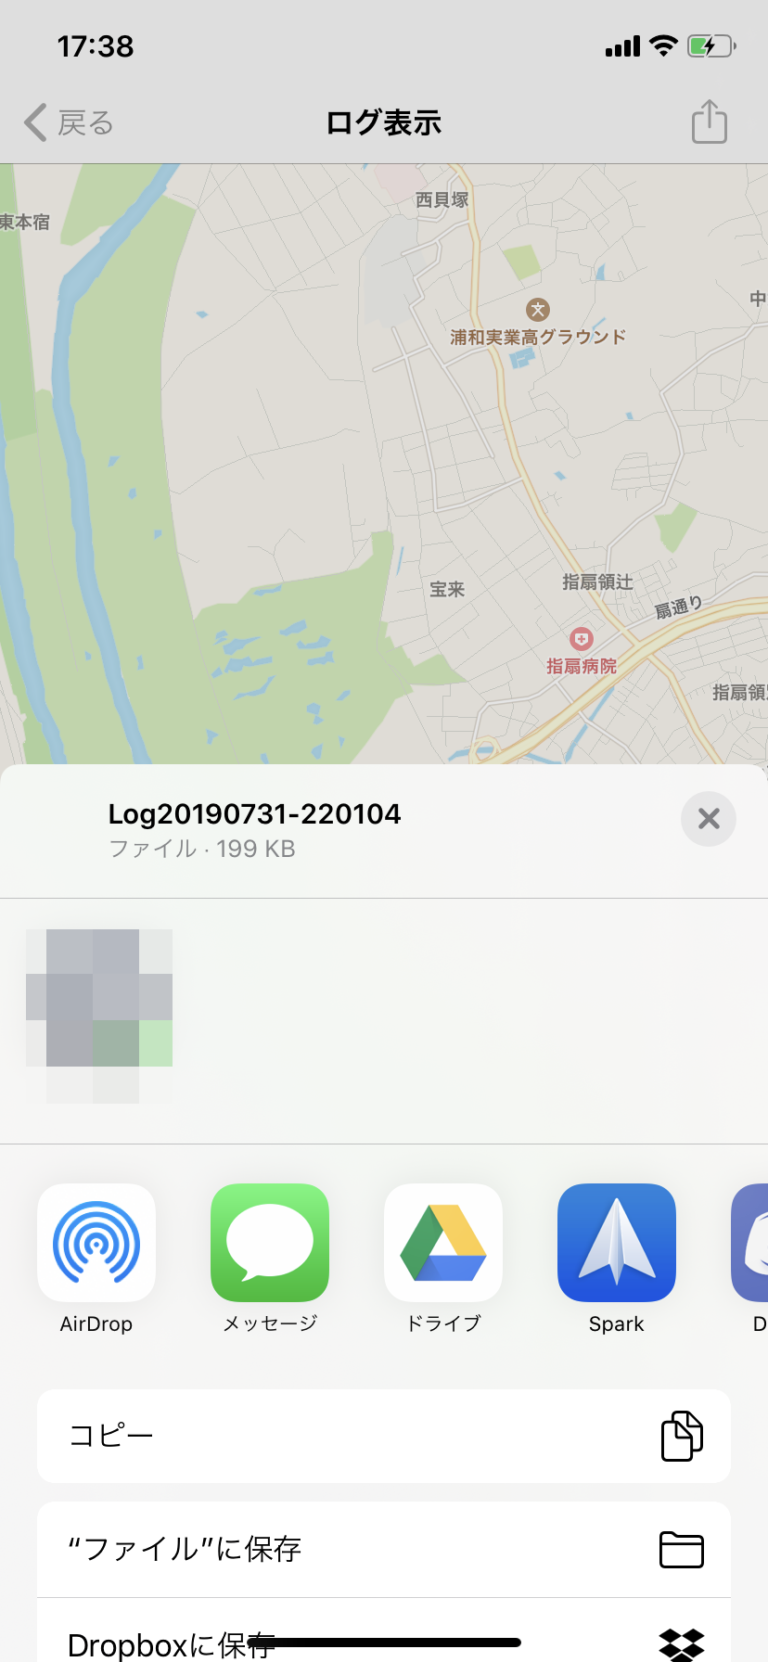 google iphone gpx viewer with navigation